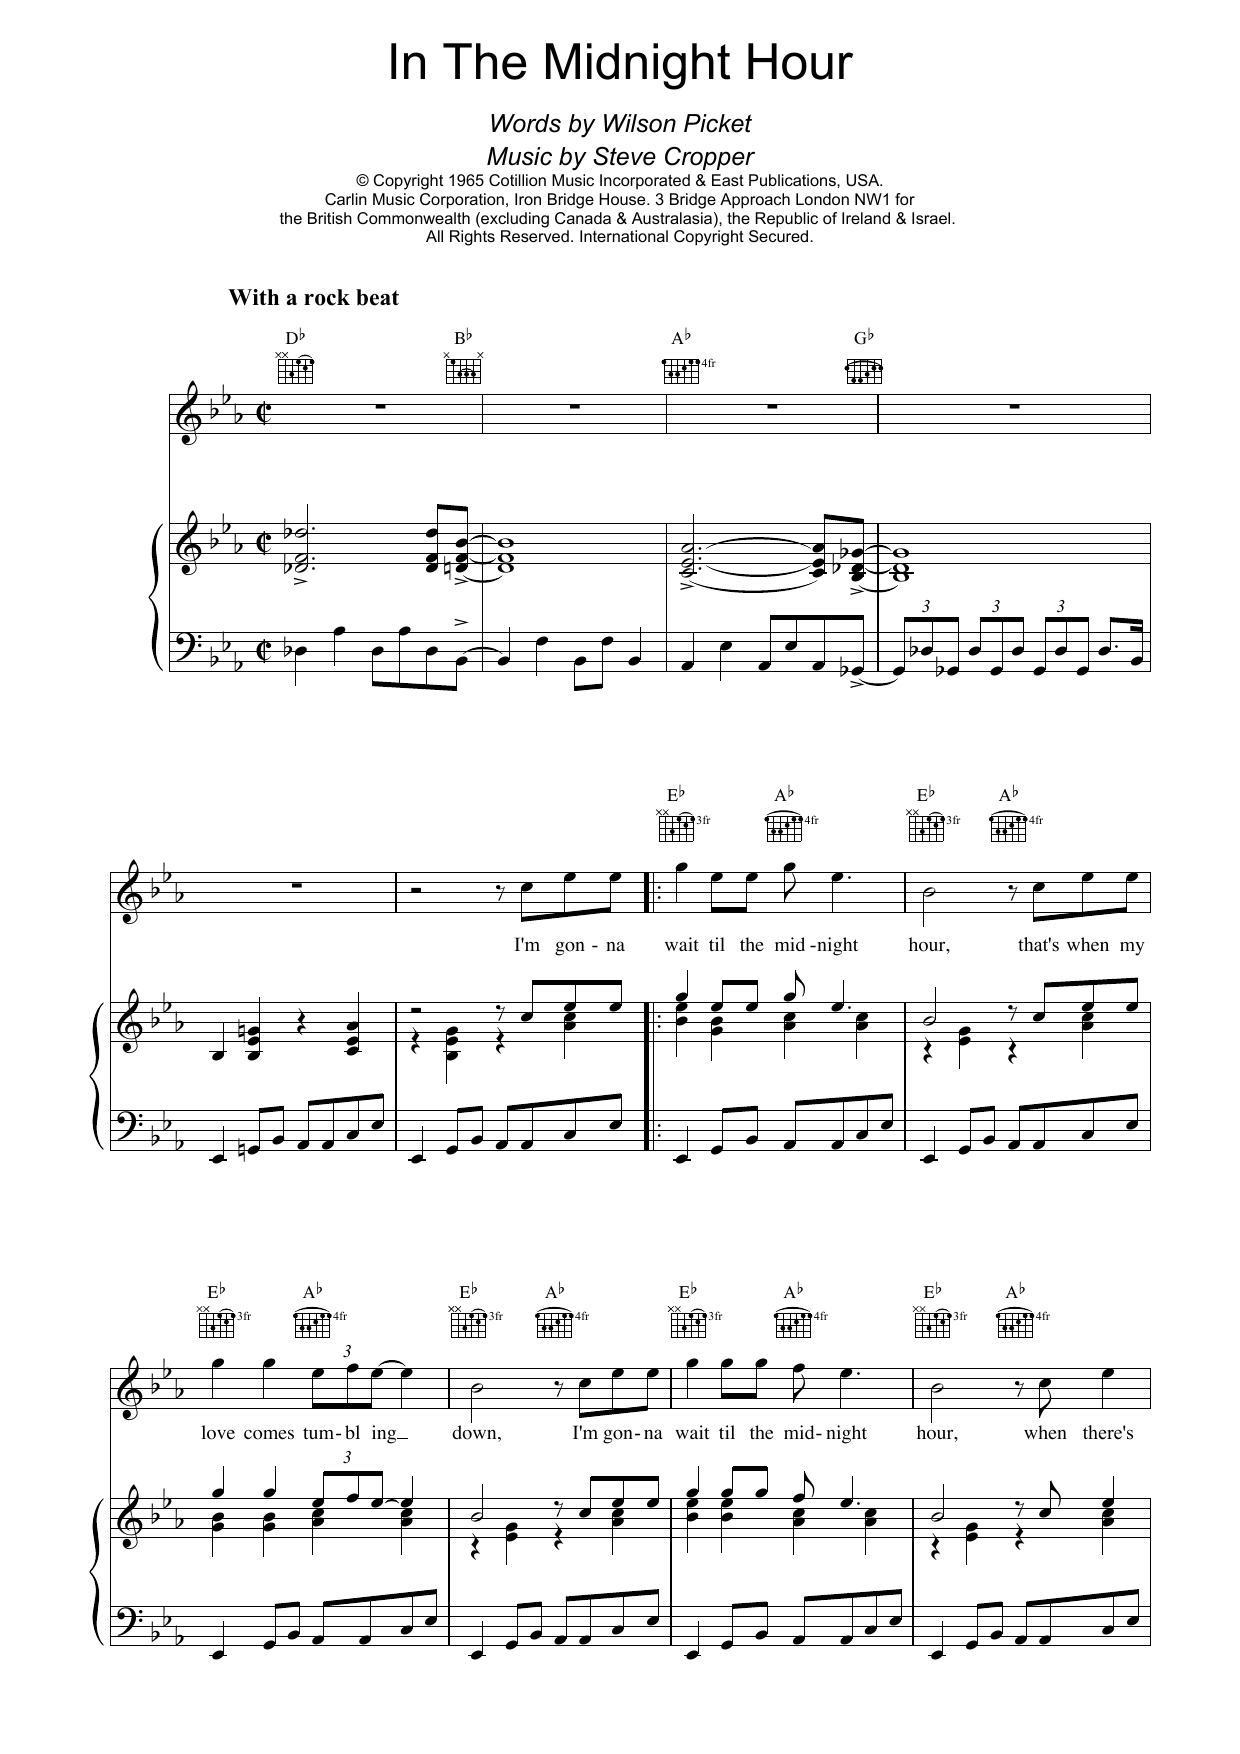 Wilson Pickett In The Midnight Hour sheet music notes printable PDF score